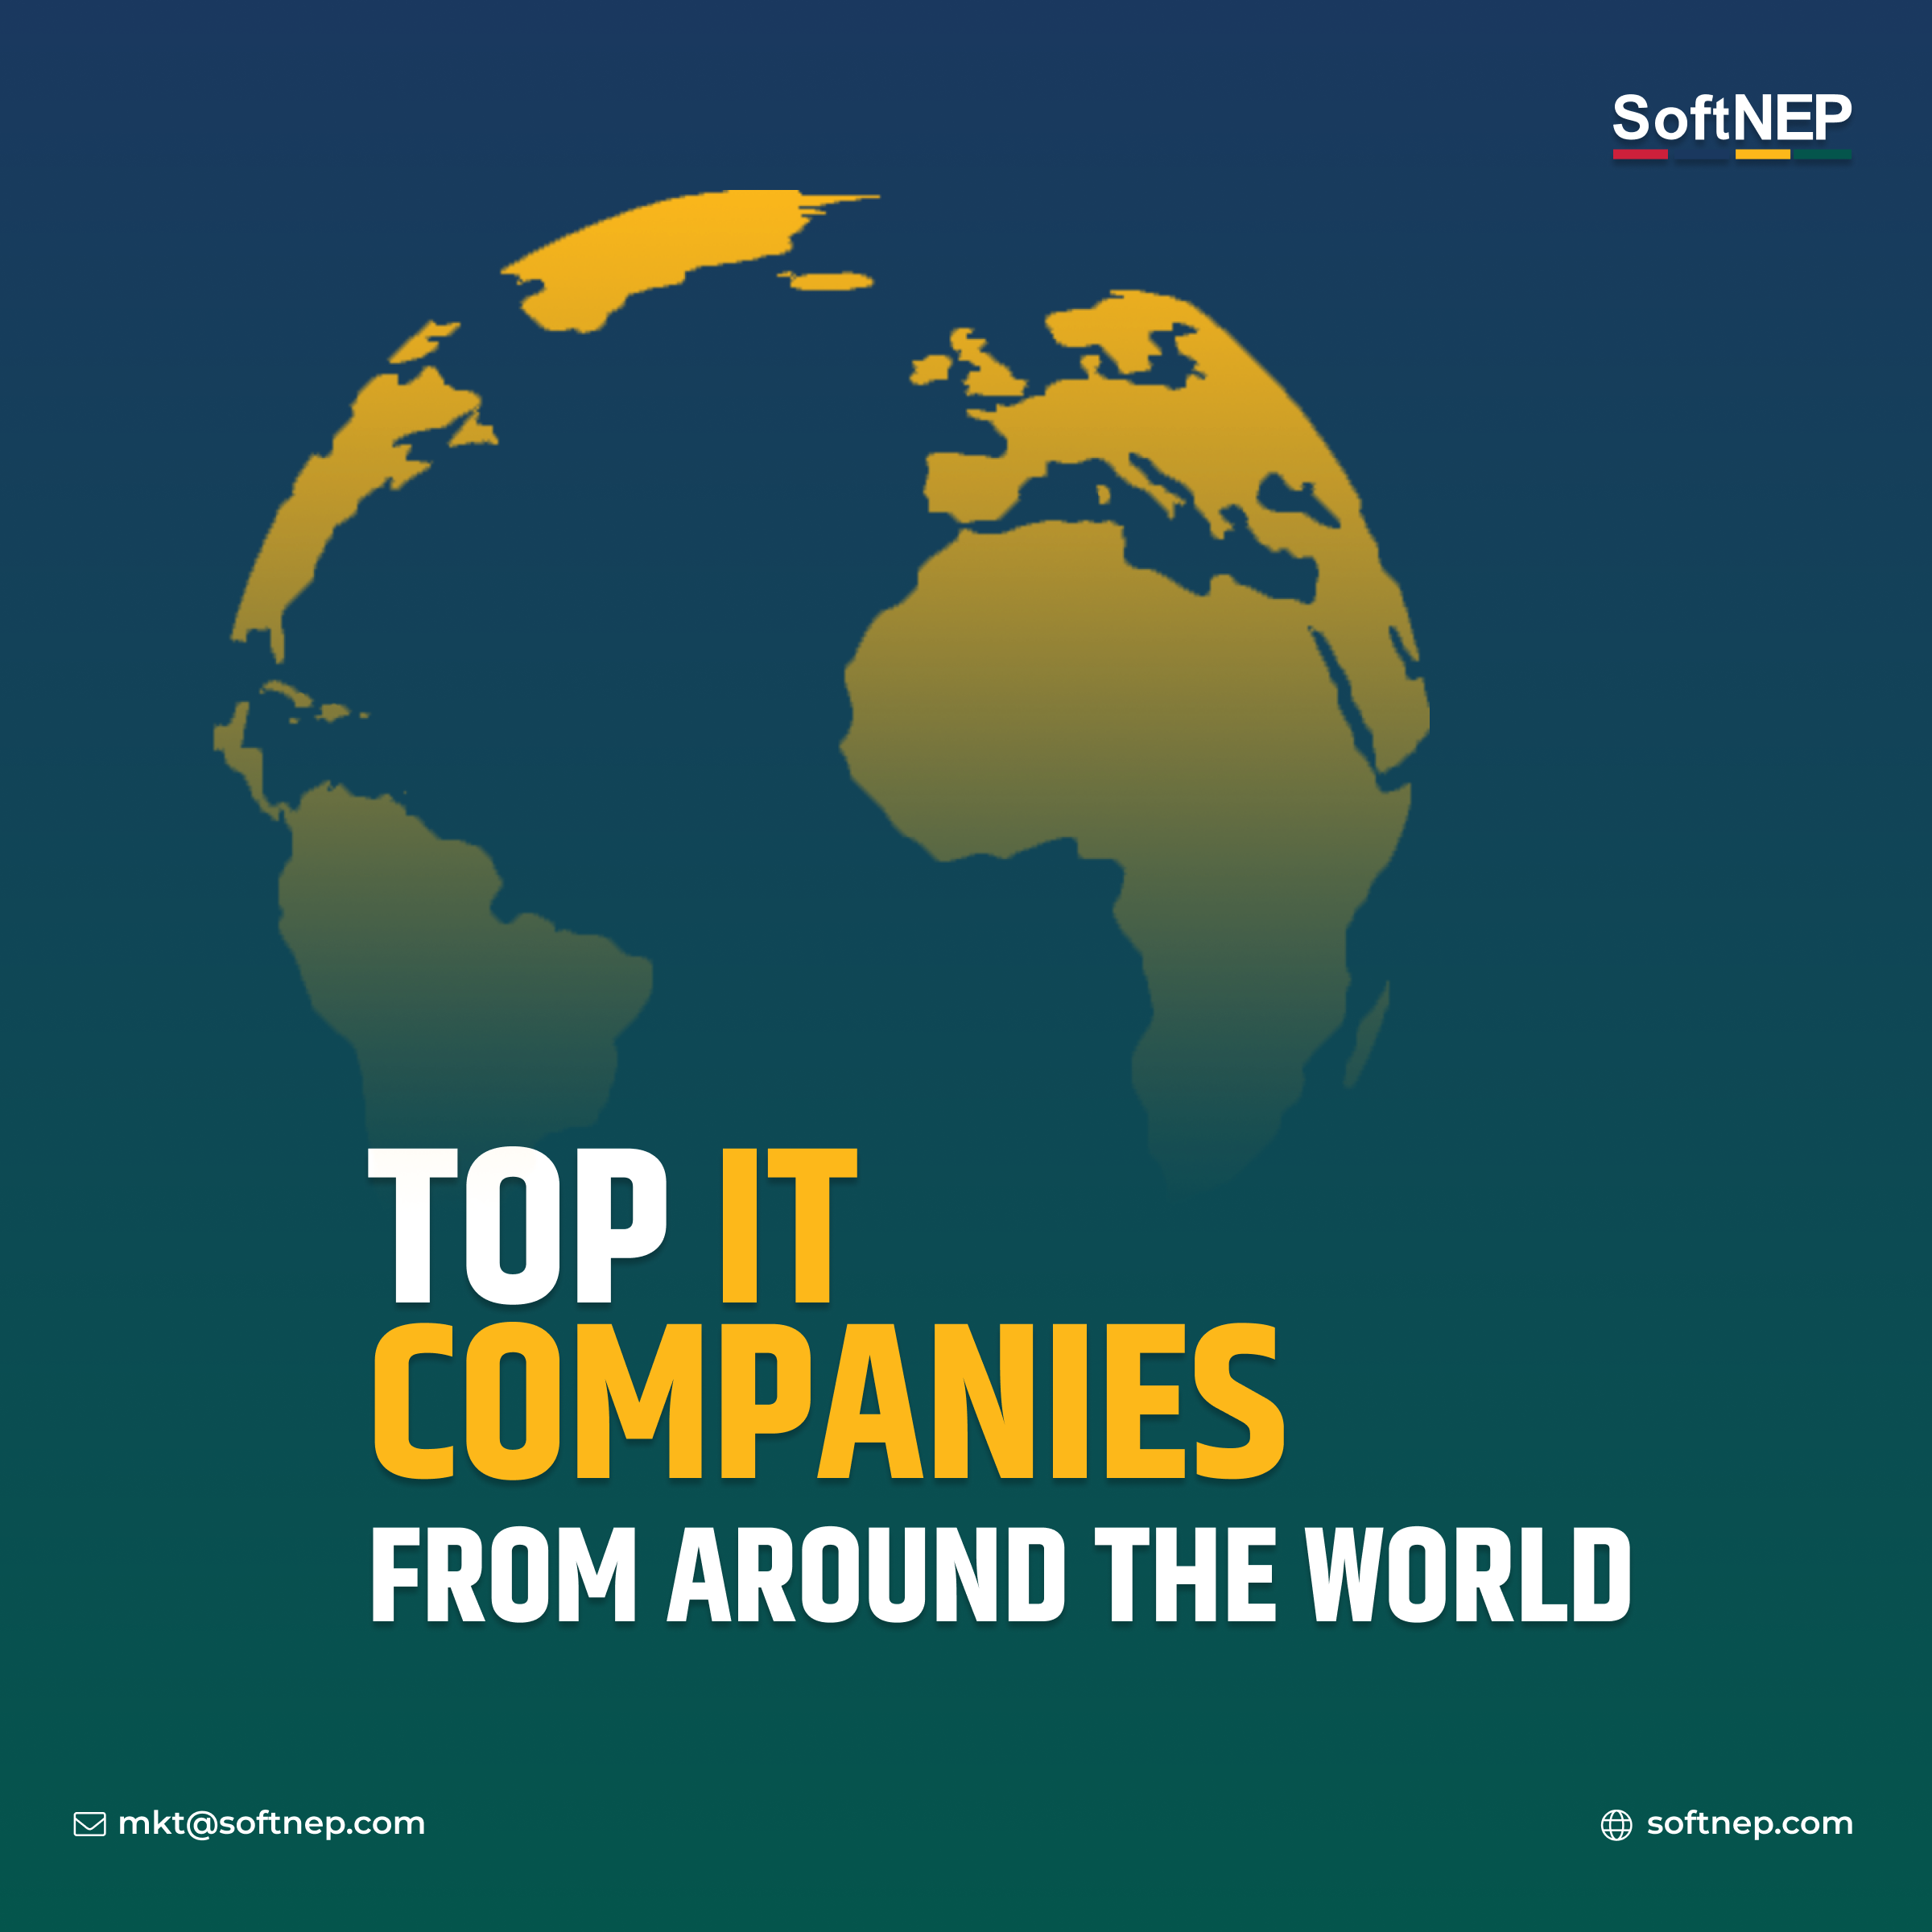 Top IT companies from around the world